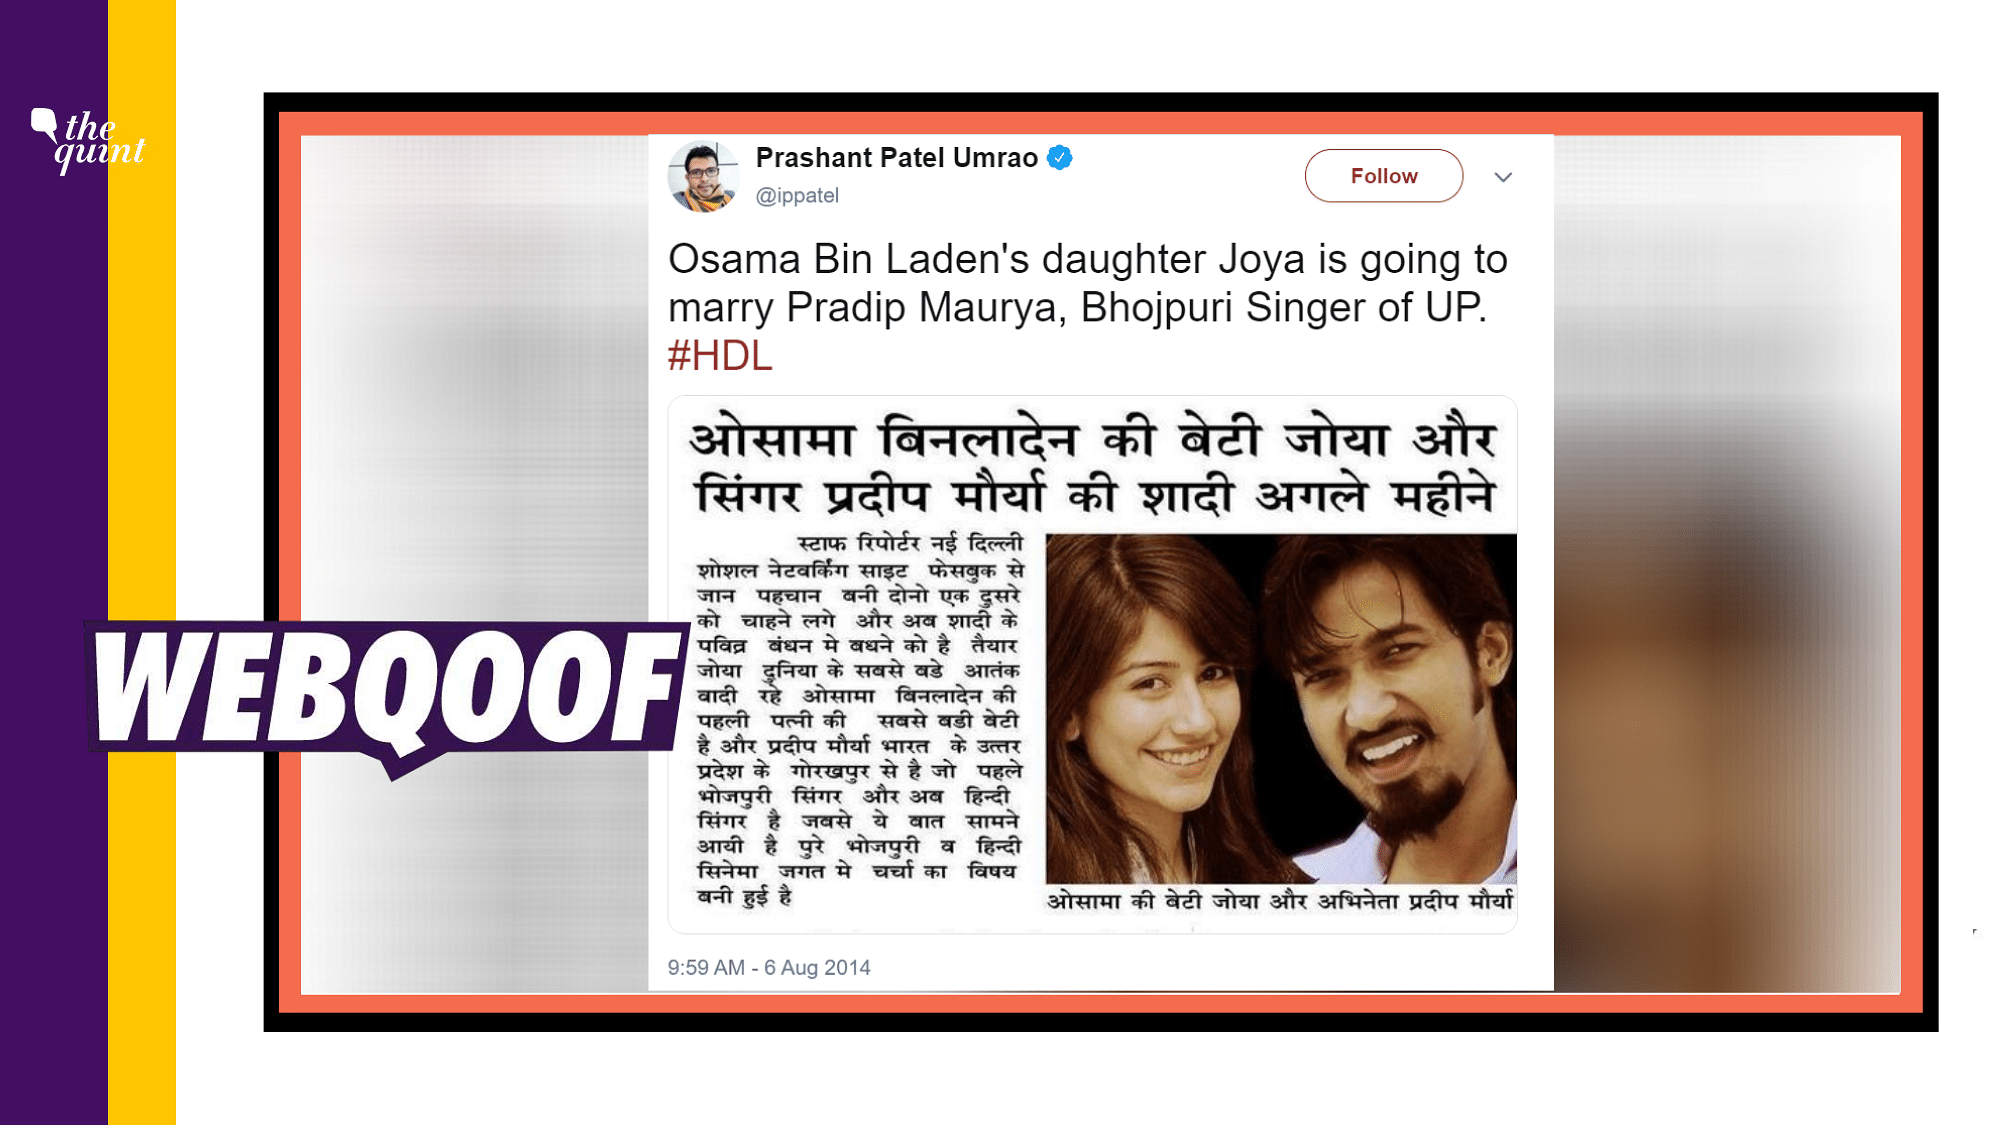 A newspaper clipping stating that <a href="https://www.thequint.com/topic/osama-bin-laden">Osama bin Laden</a>’s daughter ‘Zoya’ is set to marry Bhojpuri singer, Pradeep Maurya, has gone viral on social media.